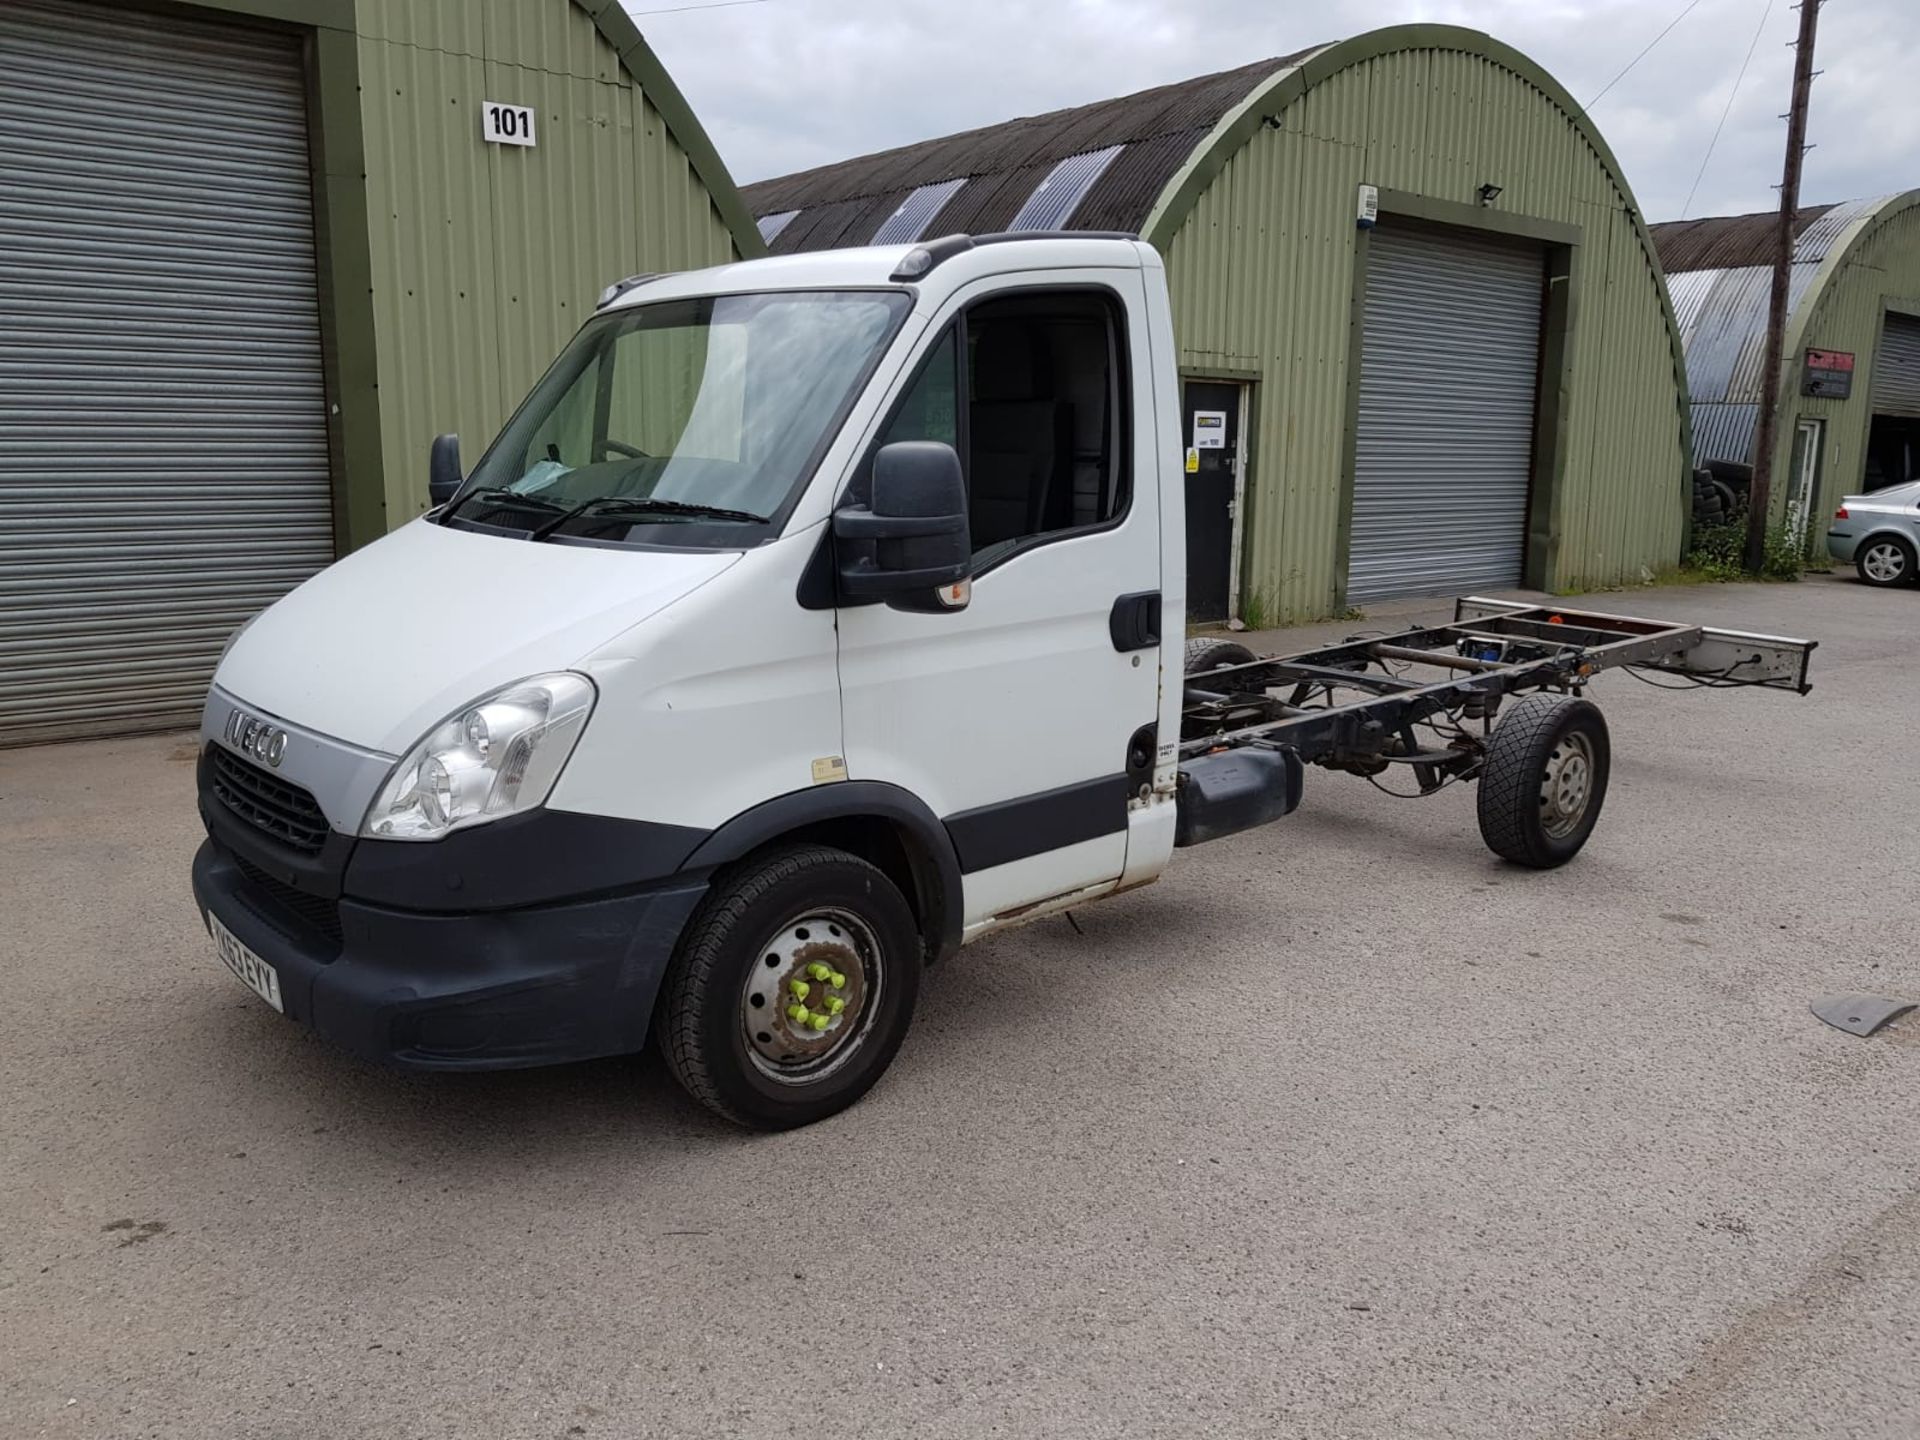 2013/63 REG IVECO DAILY 35S11 LWB IDEAL RECOVERY DIESEL CHASSIS CAB EXTENDED BED 16.5 FT *NO VAT* - Image 3 of 19